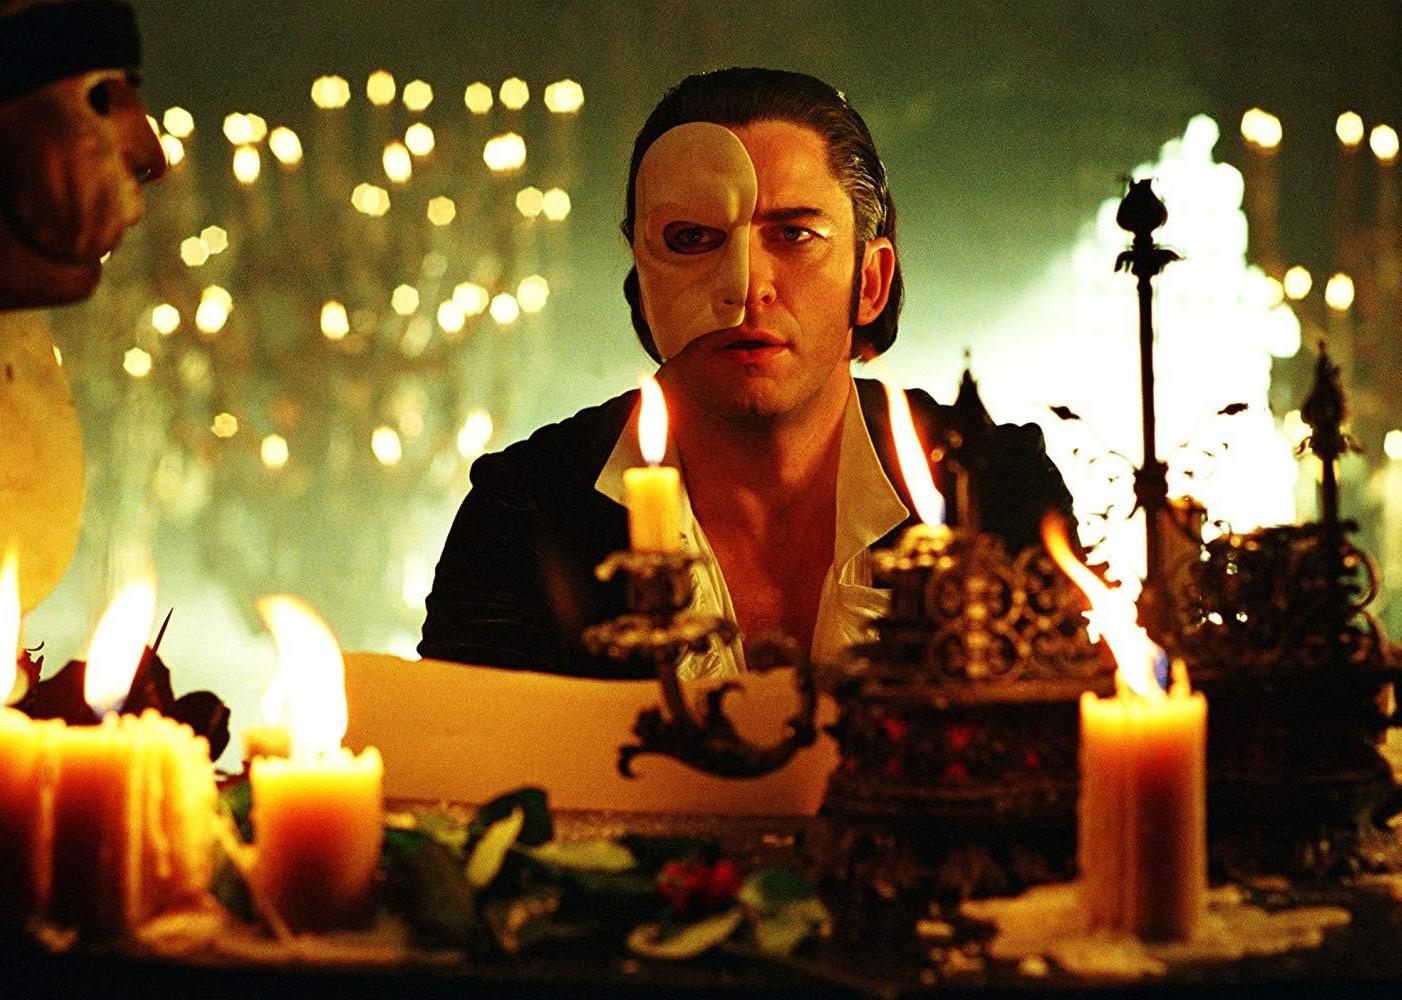 A man at a candlelit table wearing half a face mask.